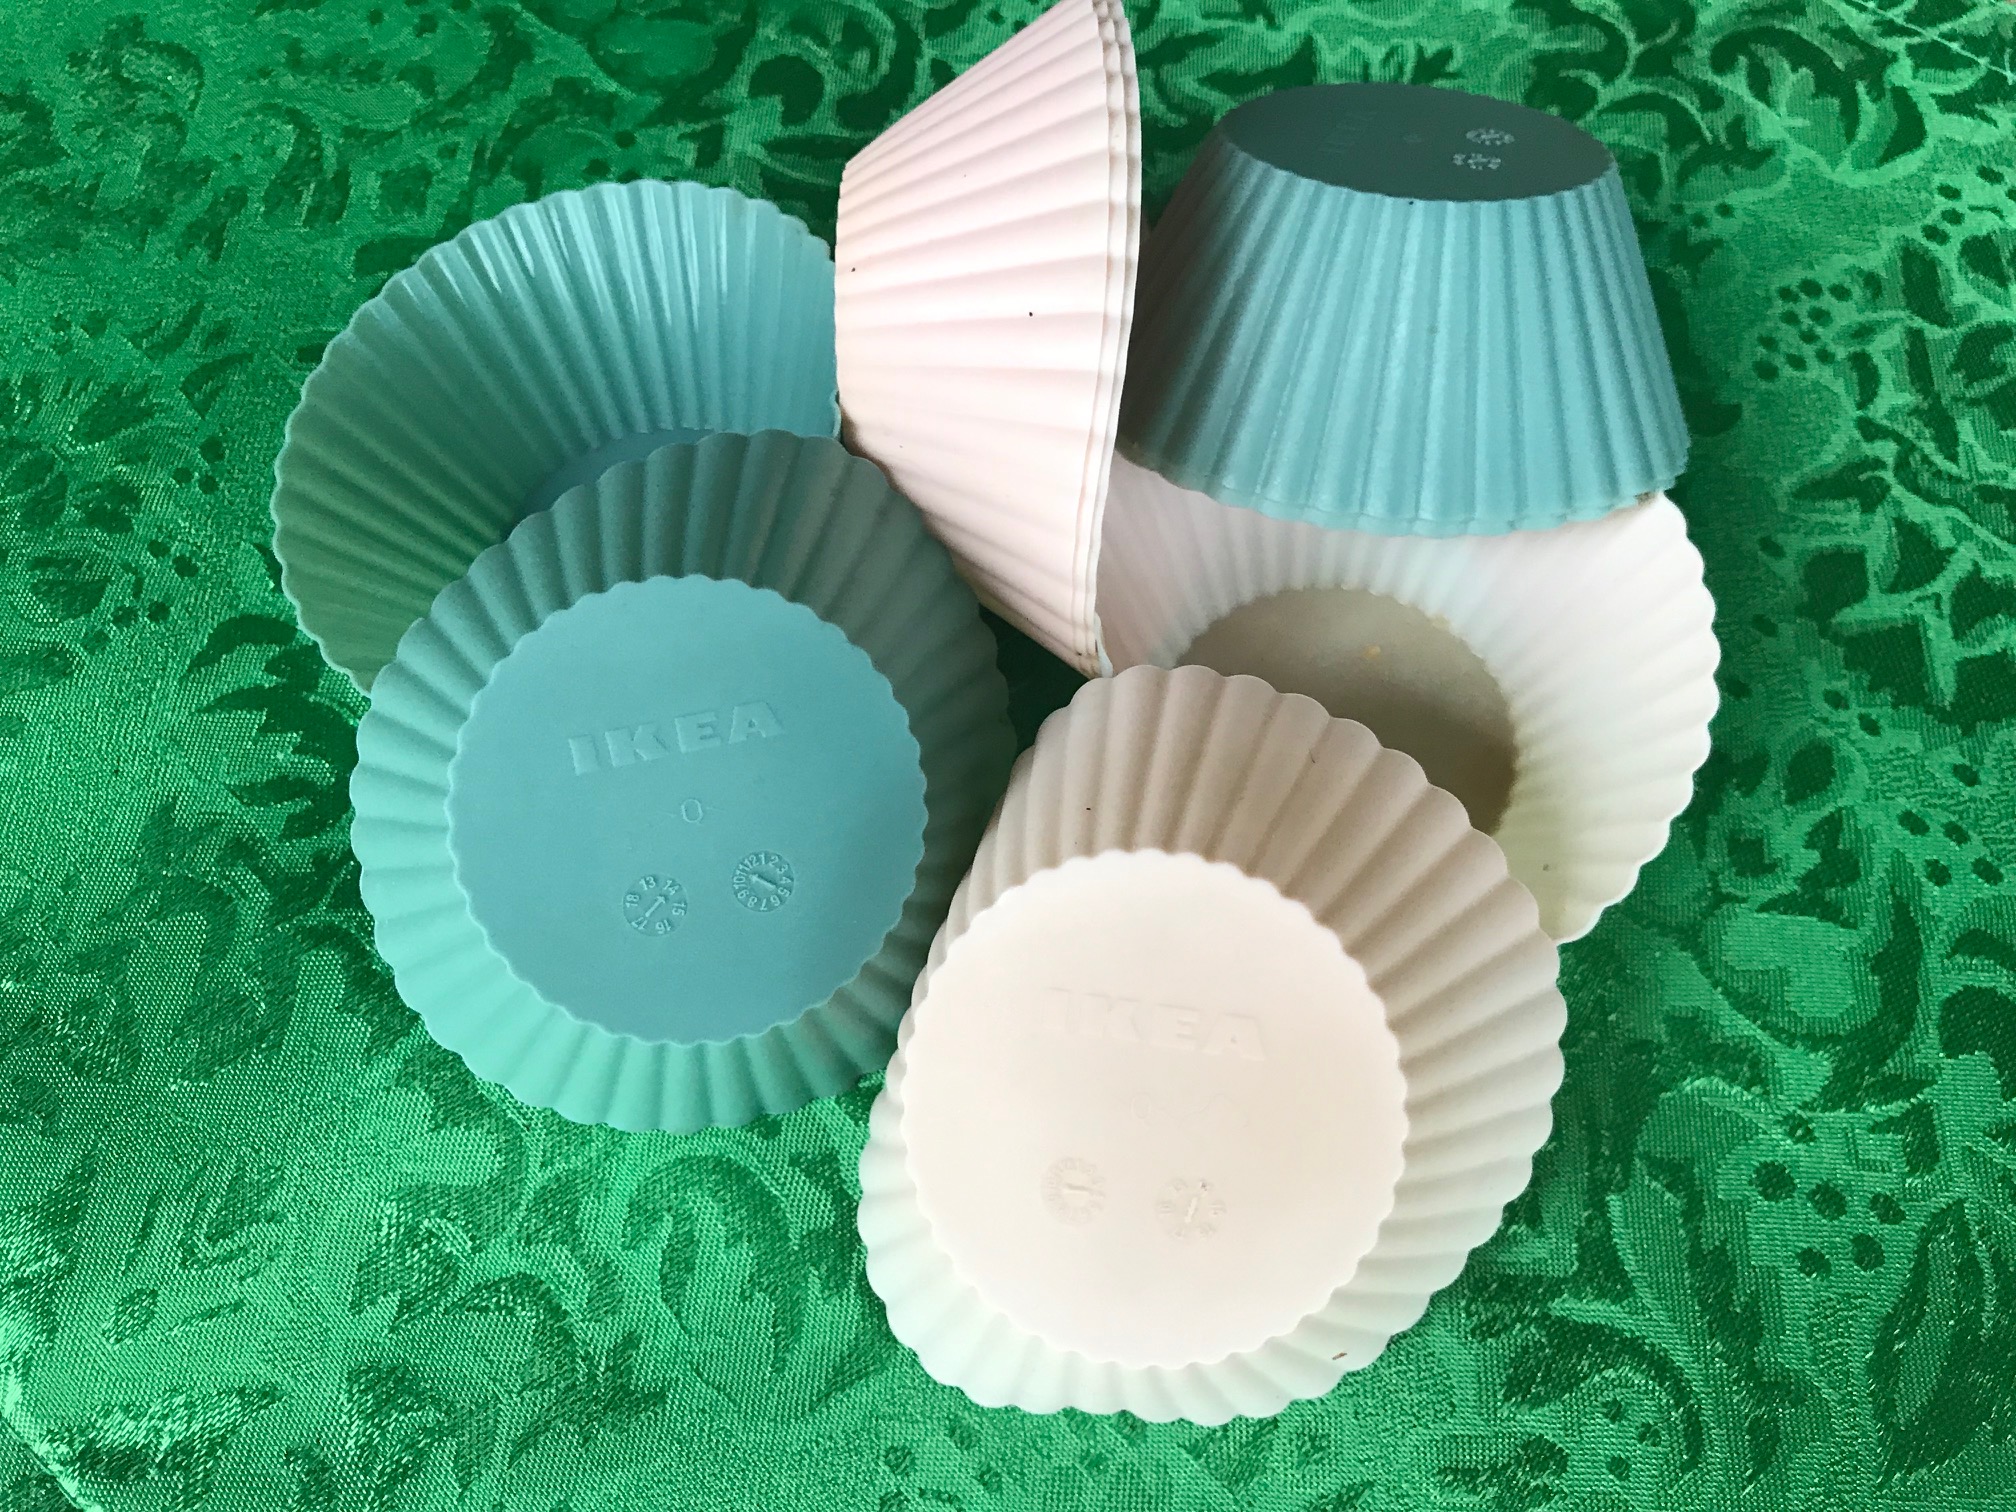 2018 Ikea Reusable Silicone Muffin Cups: Cadmium FREE!!!